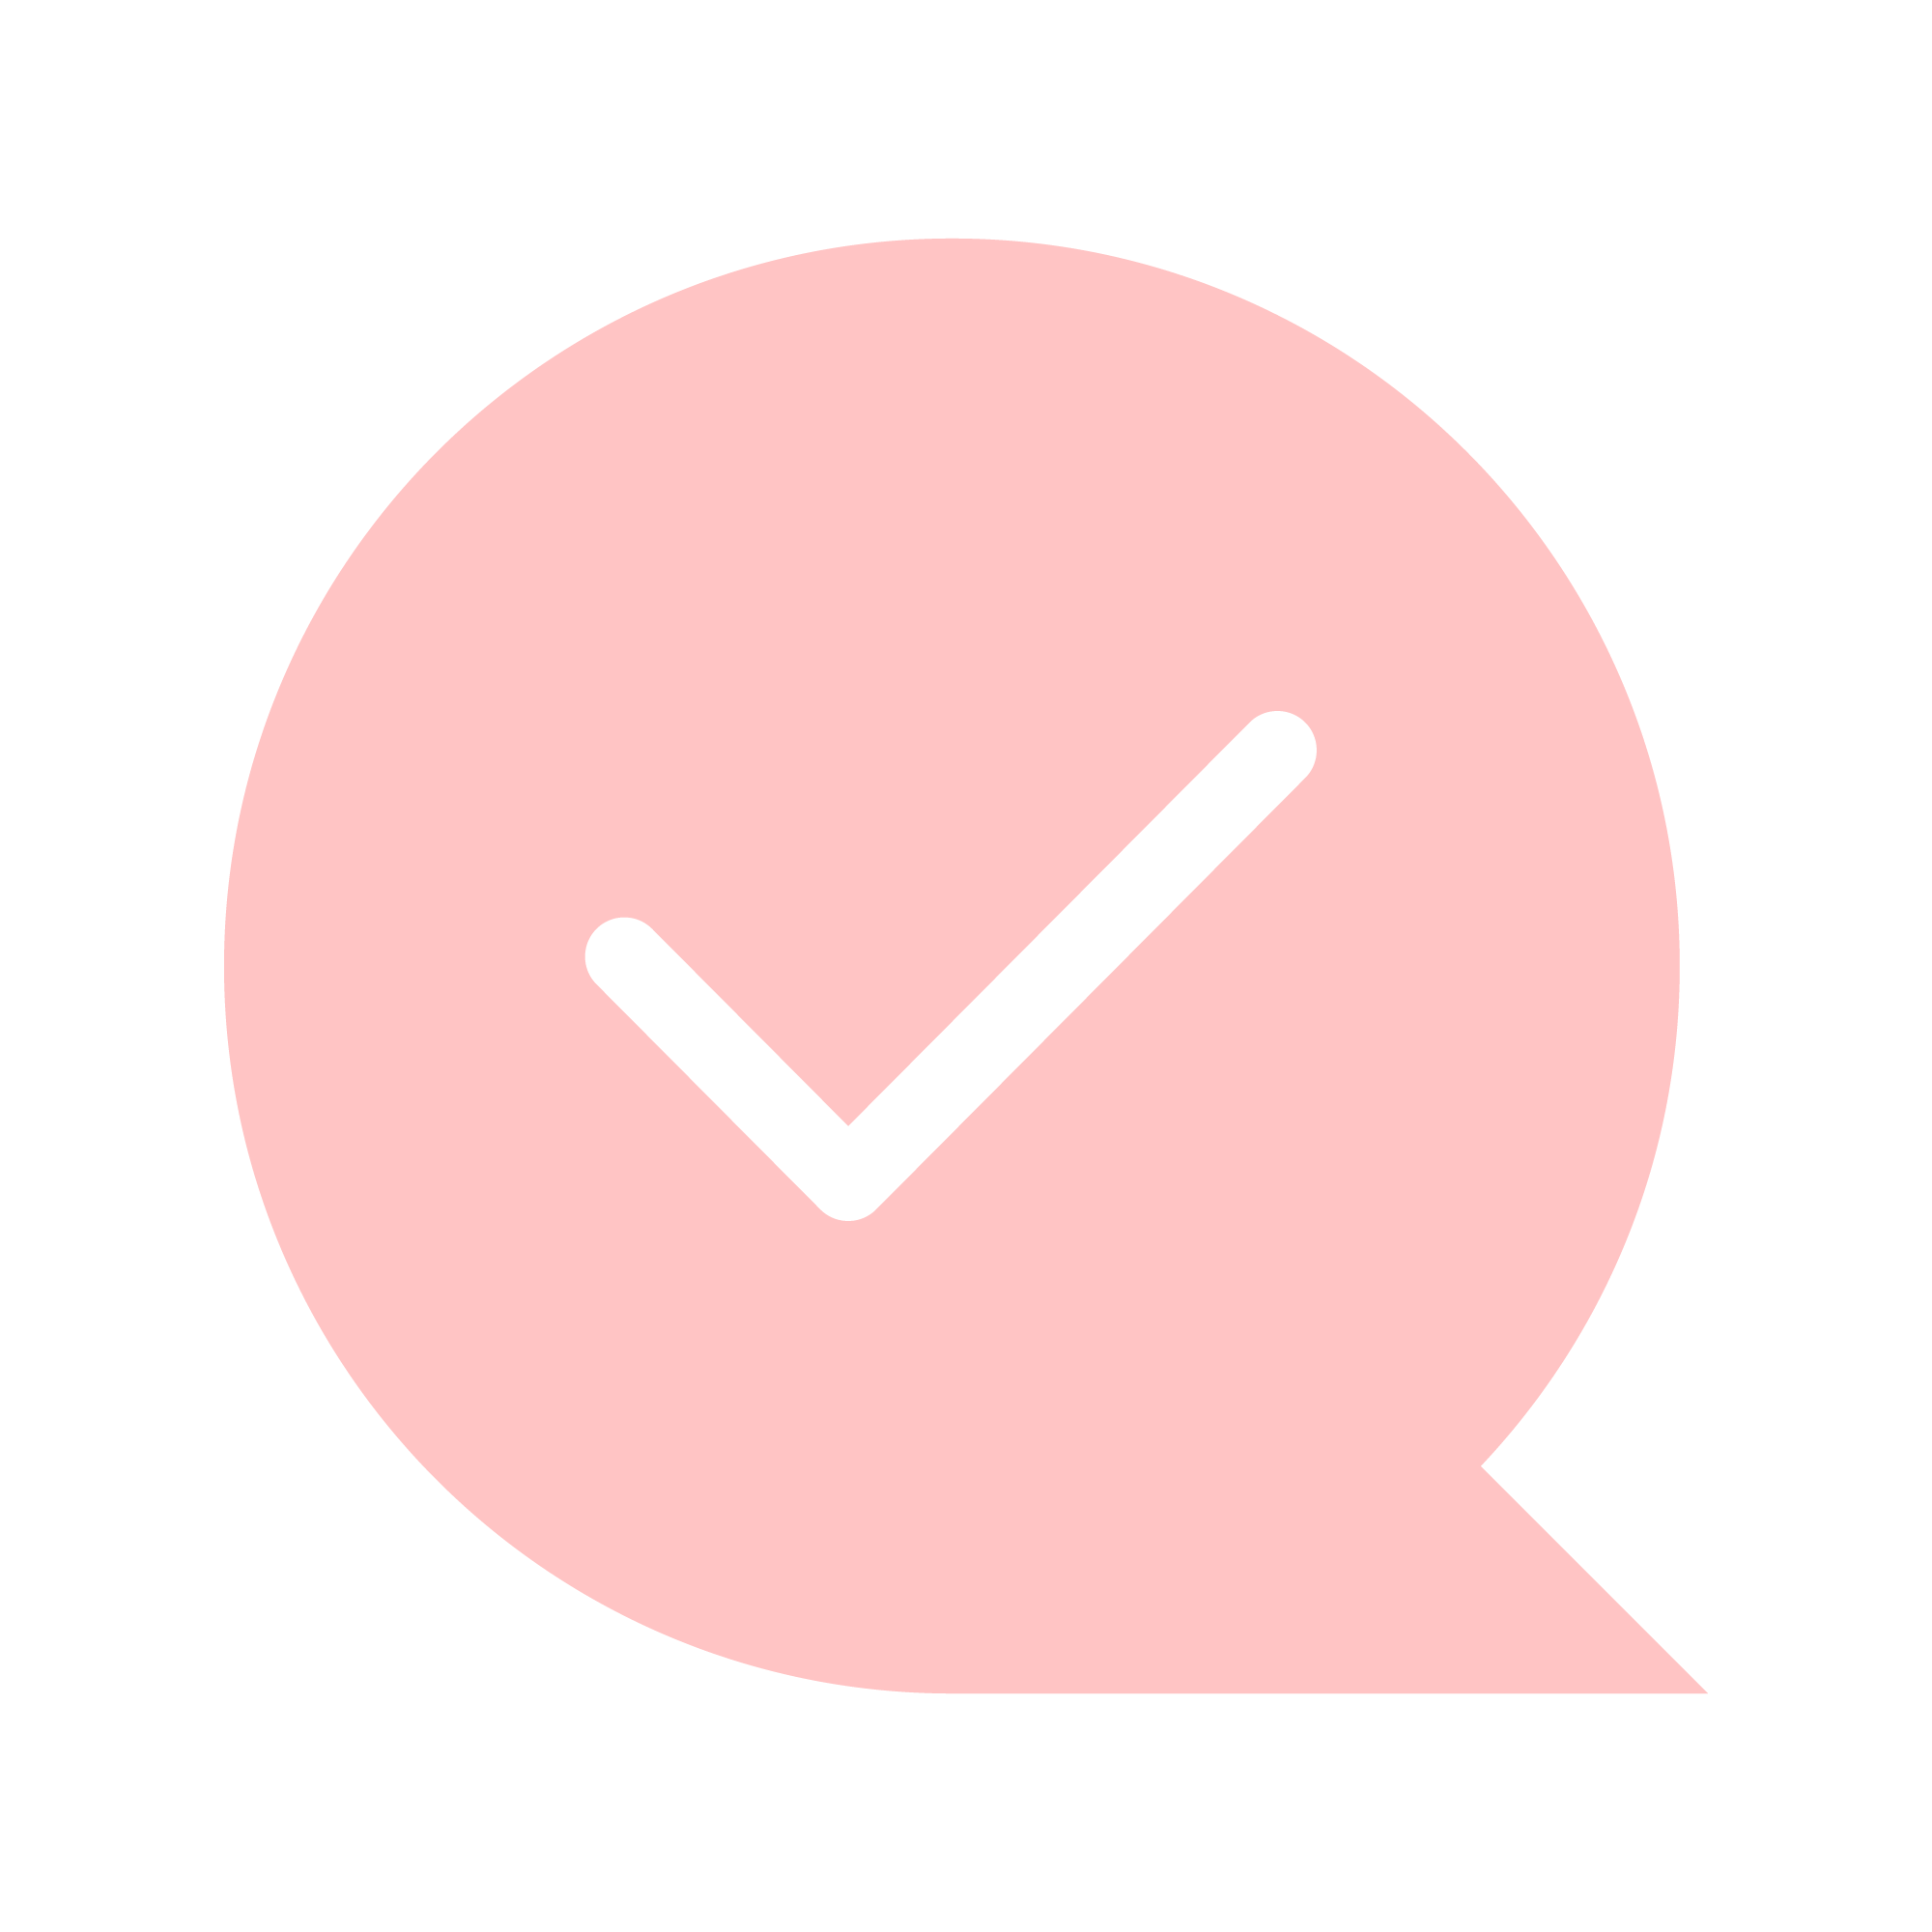 Pink speech bubble icon with white tick